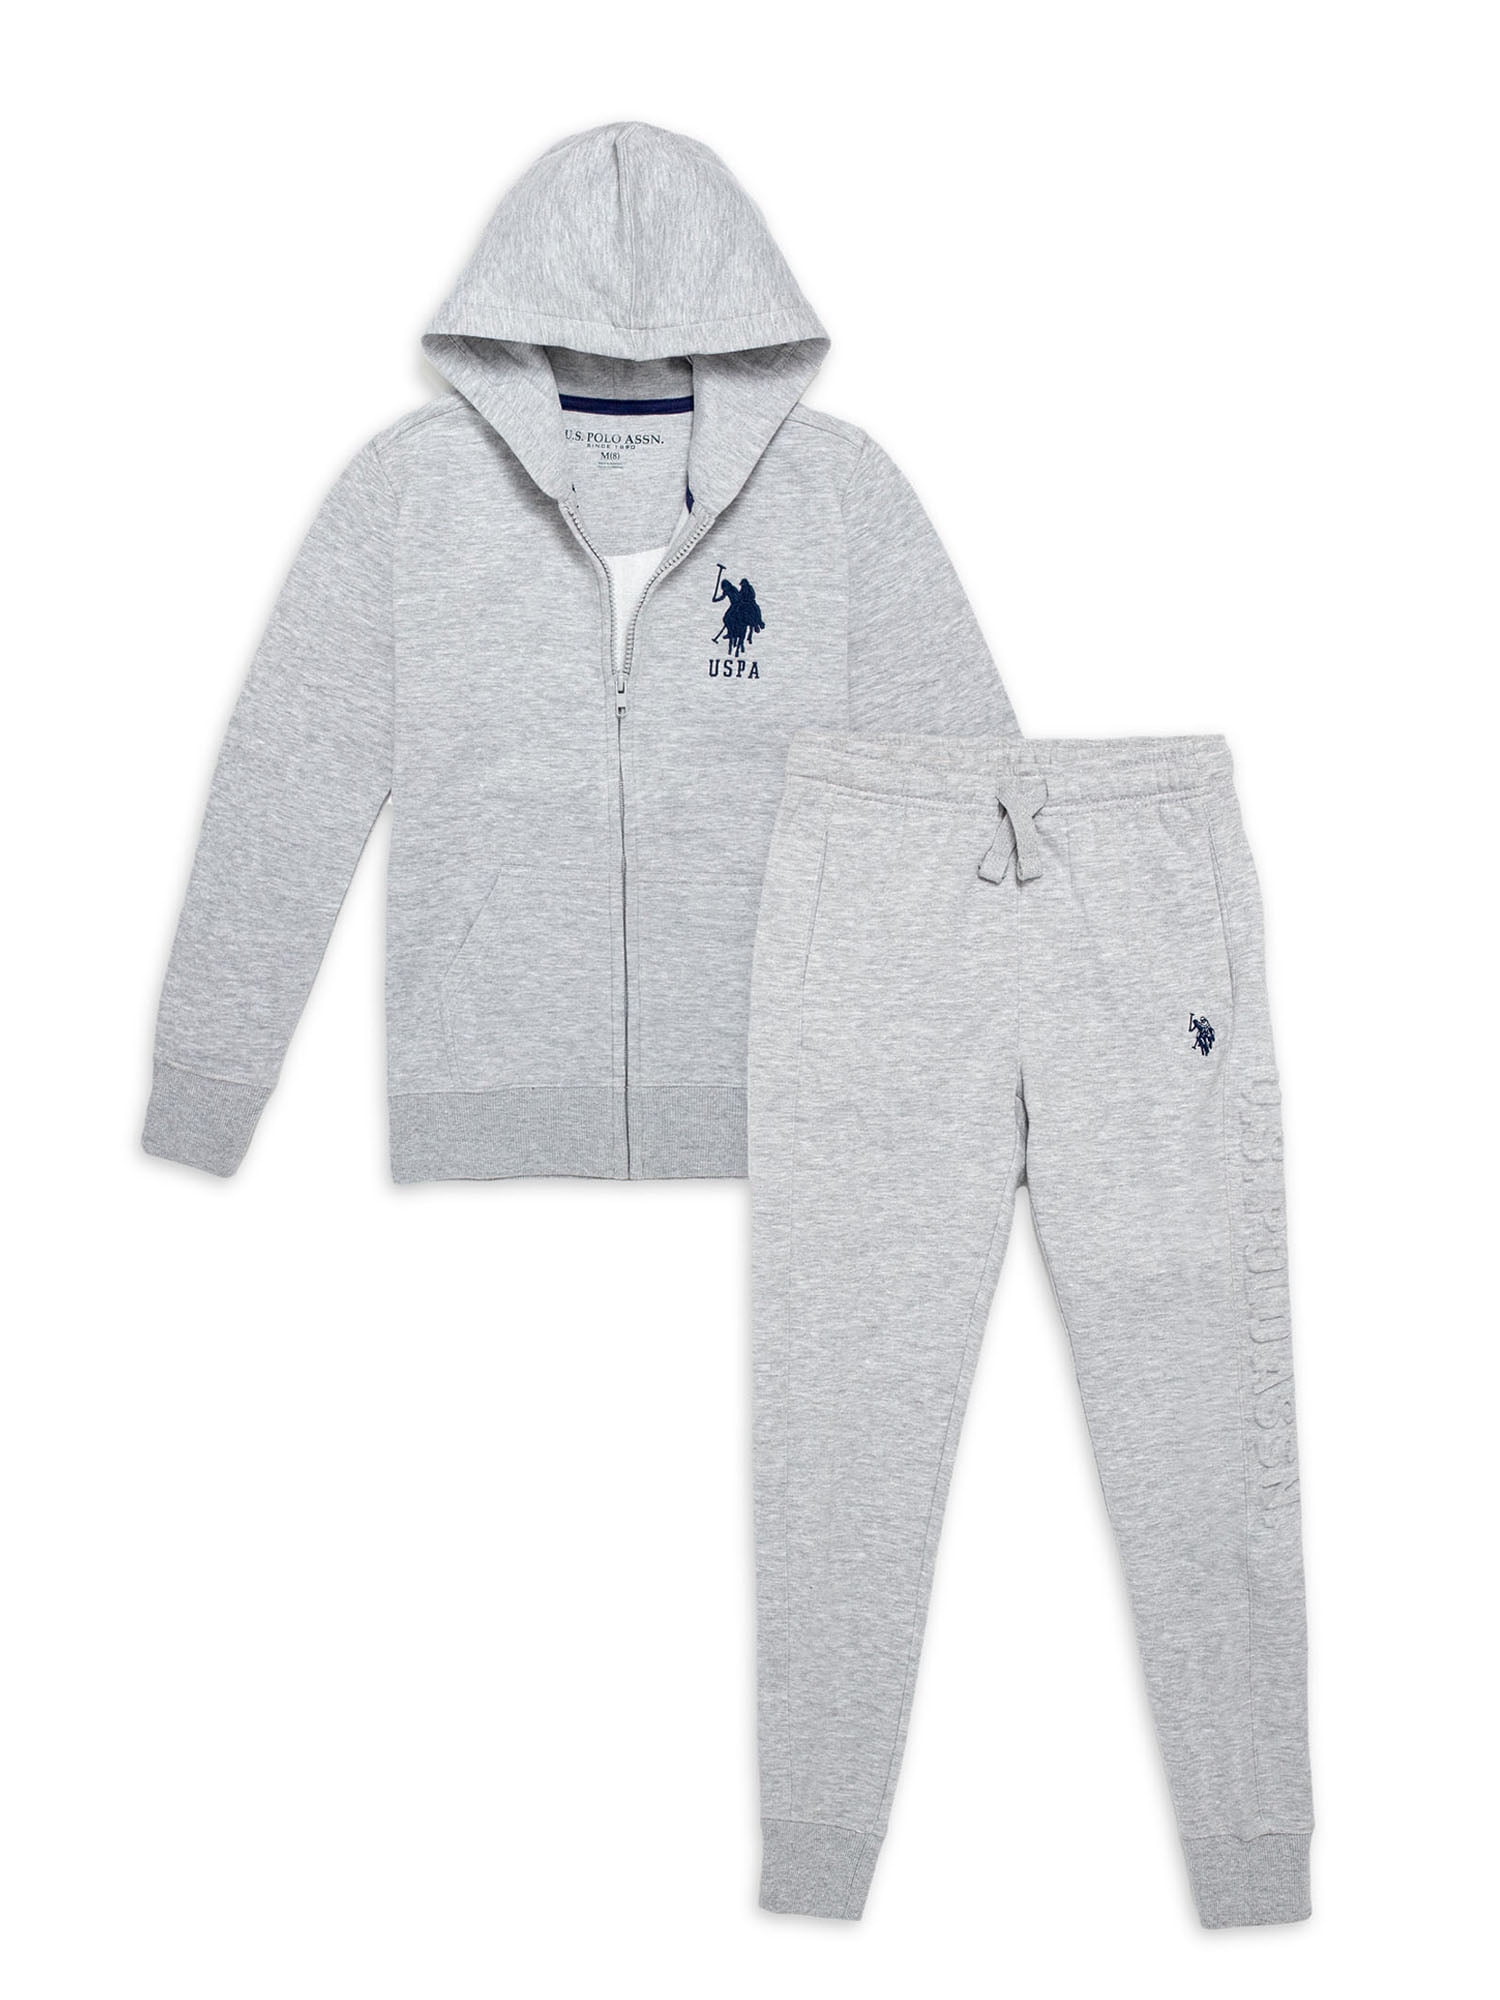 U.S Polo Assn Girls Toddler 2 Piece French Terry Set 